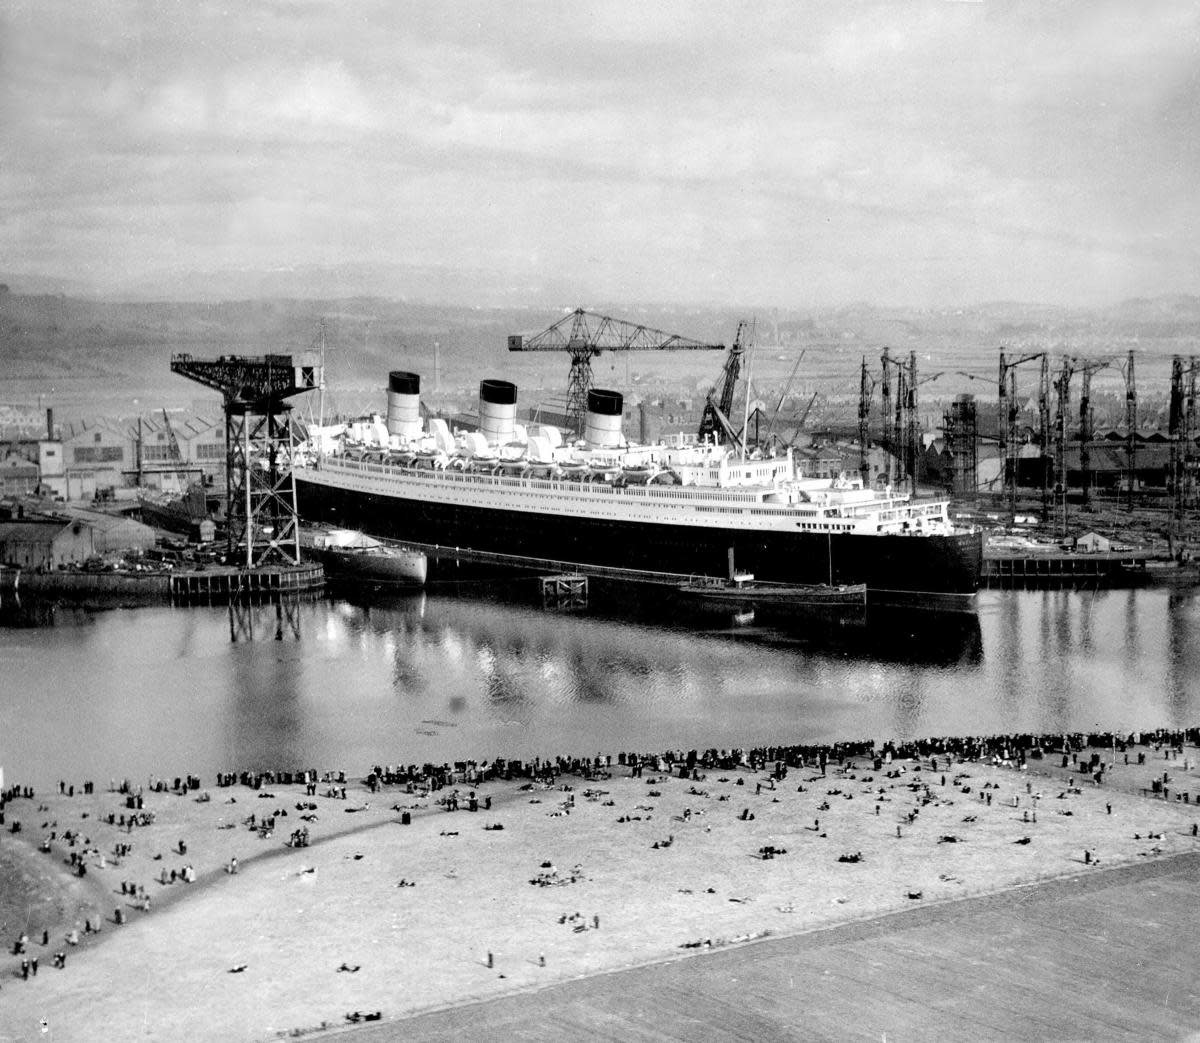 The Queen Mary, built at John Brown's in Clydebank in 1936.